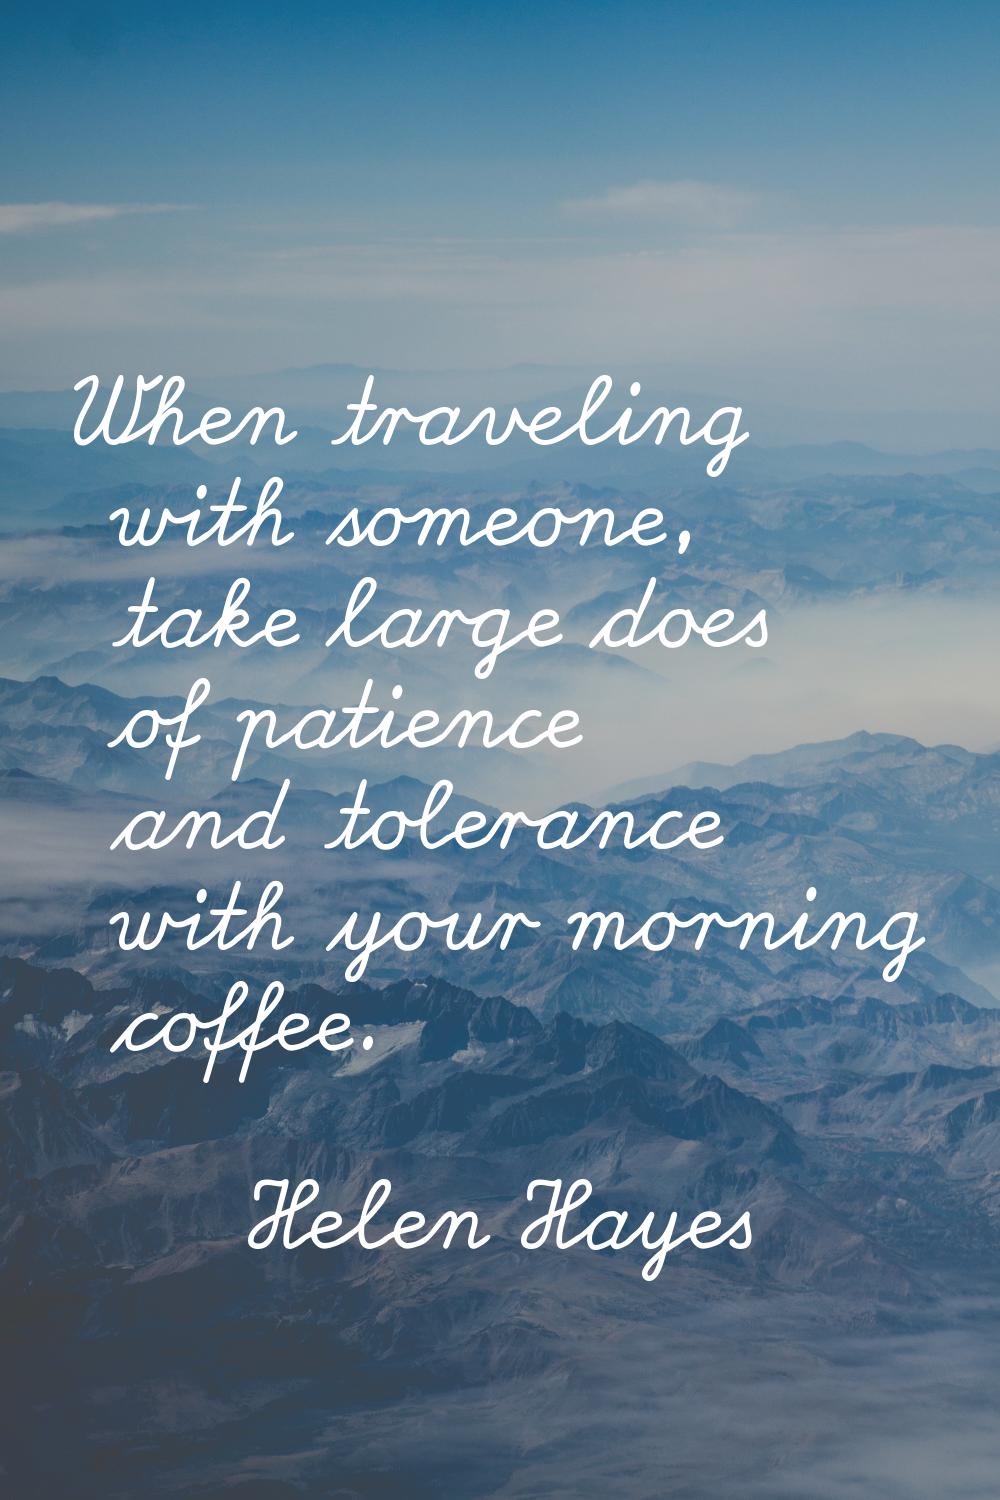 When traveling with someone, take large does of patience and tolerance with your morning coffee.